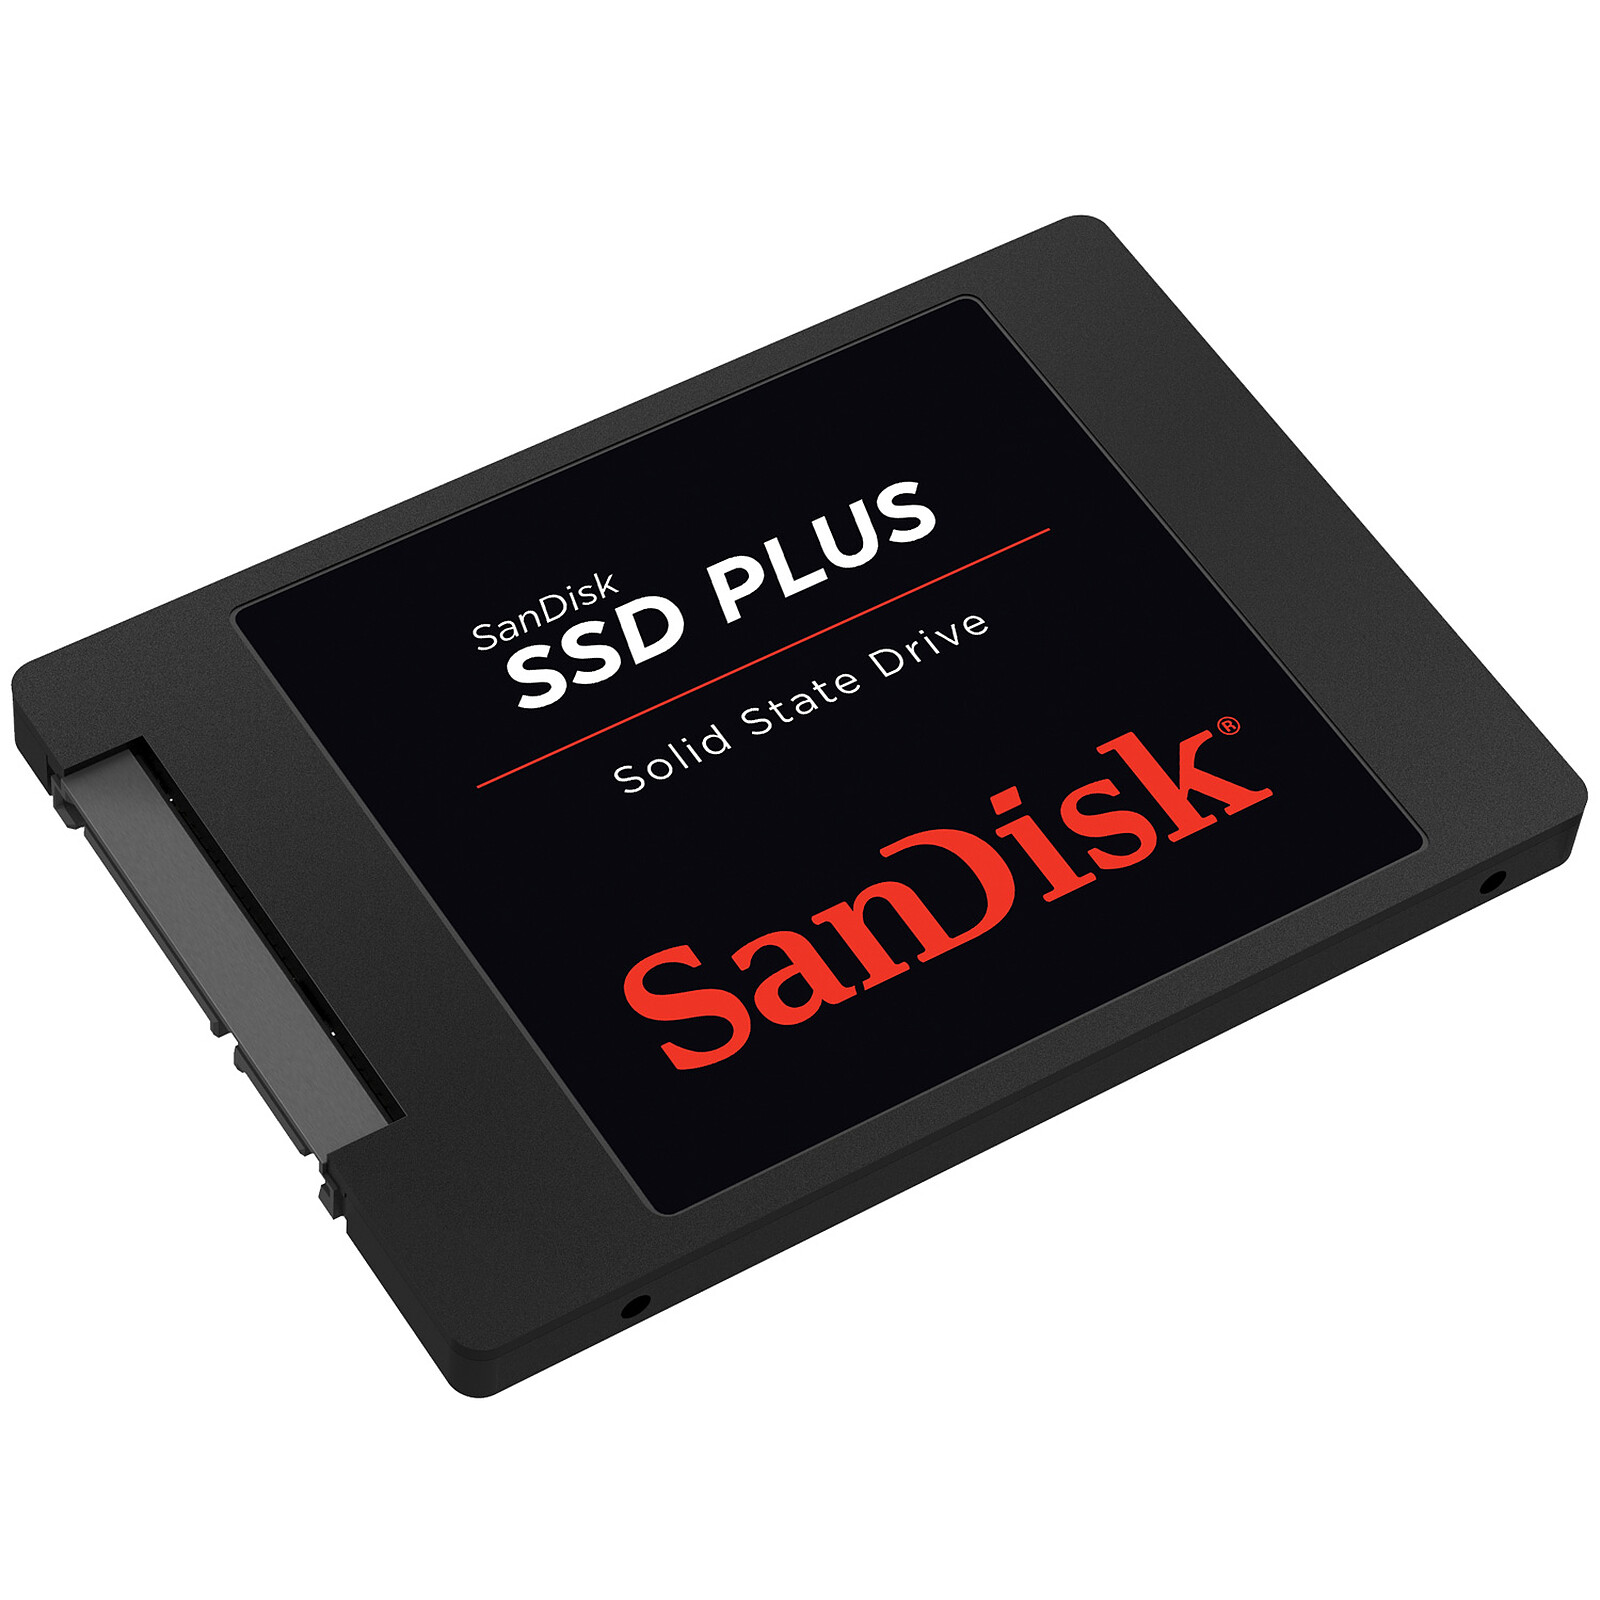 How to Install a SanDisk® SSD in Your Laptop